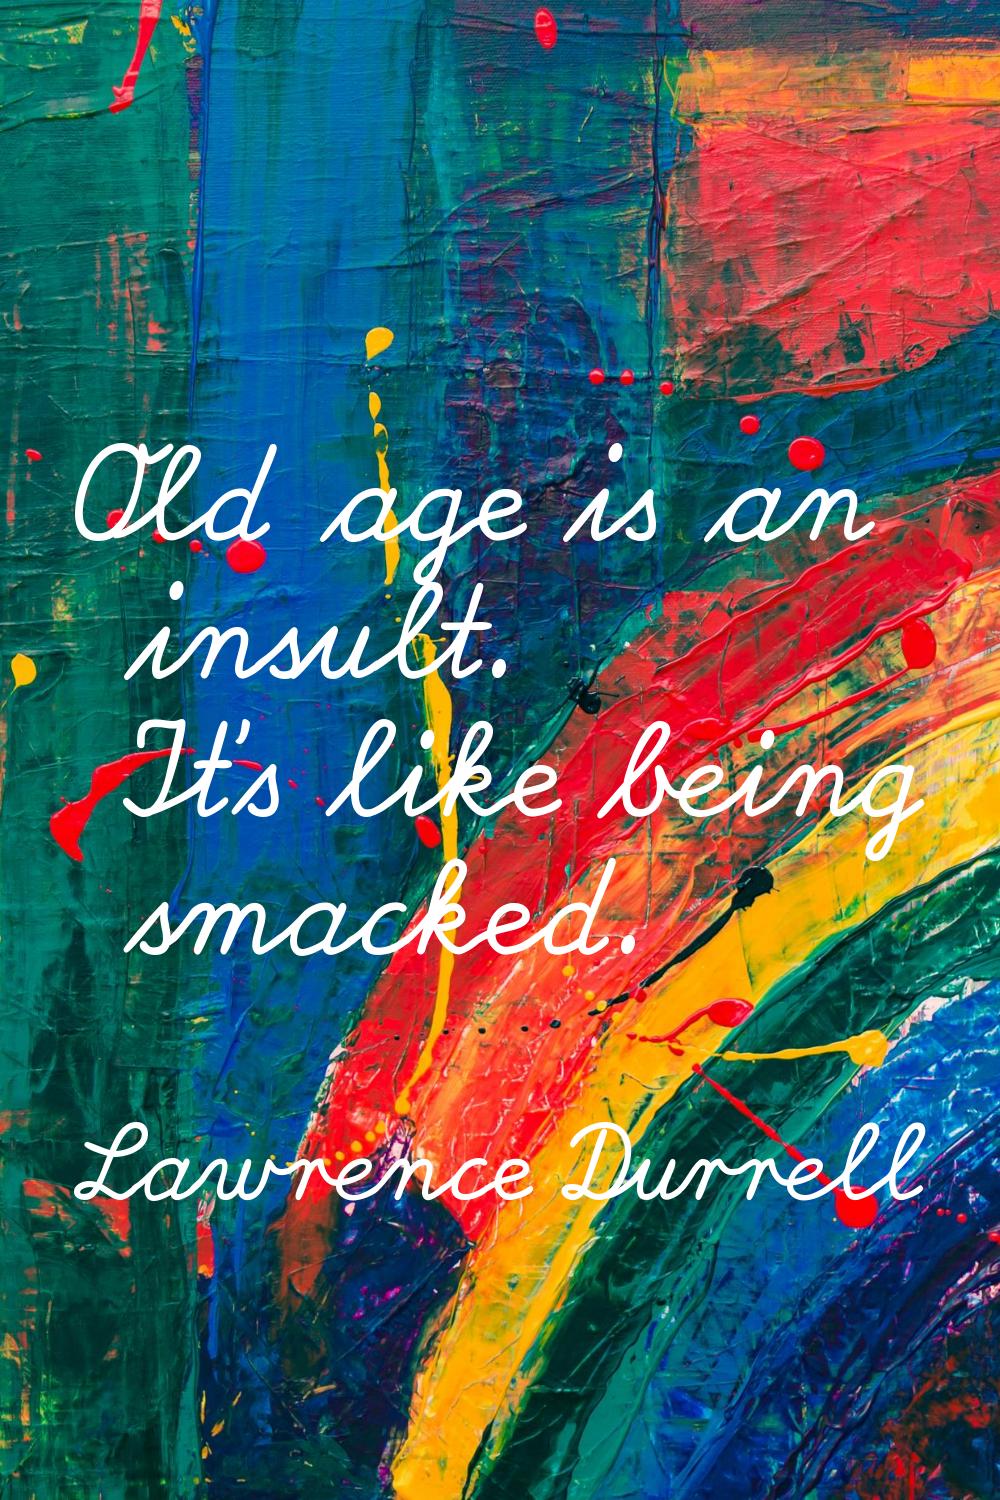 Old age is an insult. It's like being smacked.